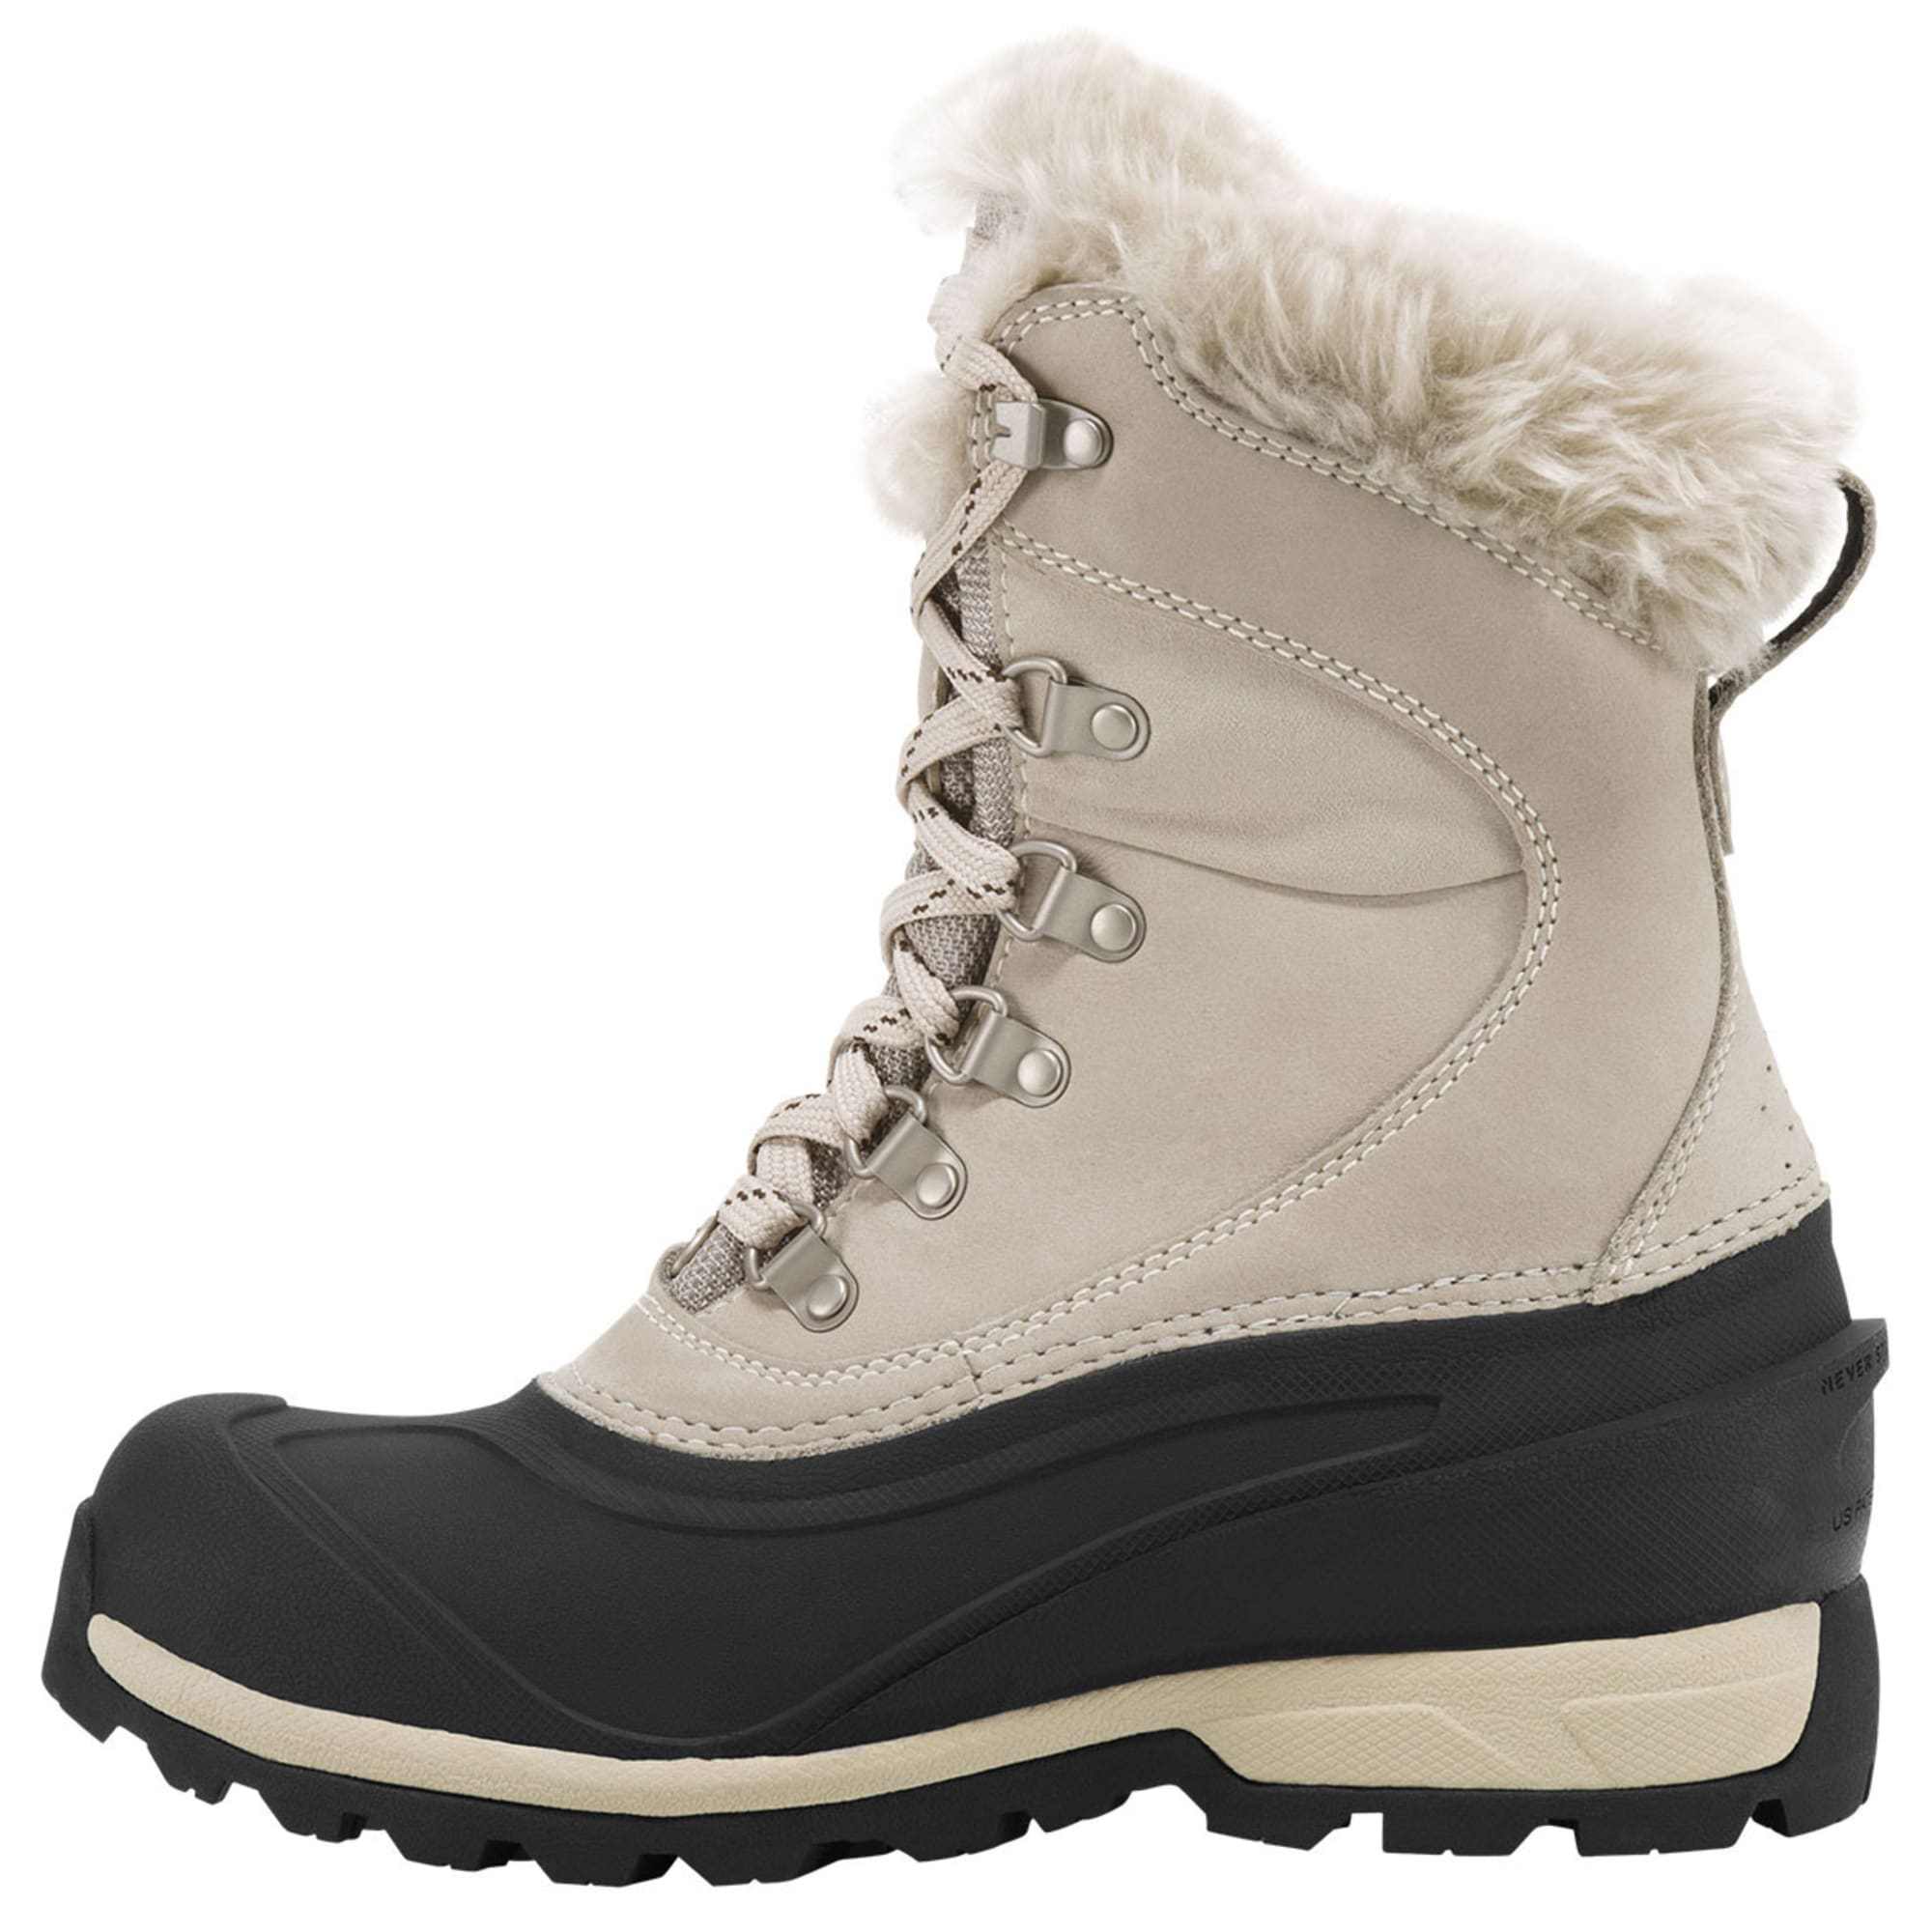 north face chilkat 400 womens